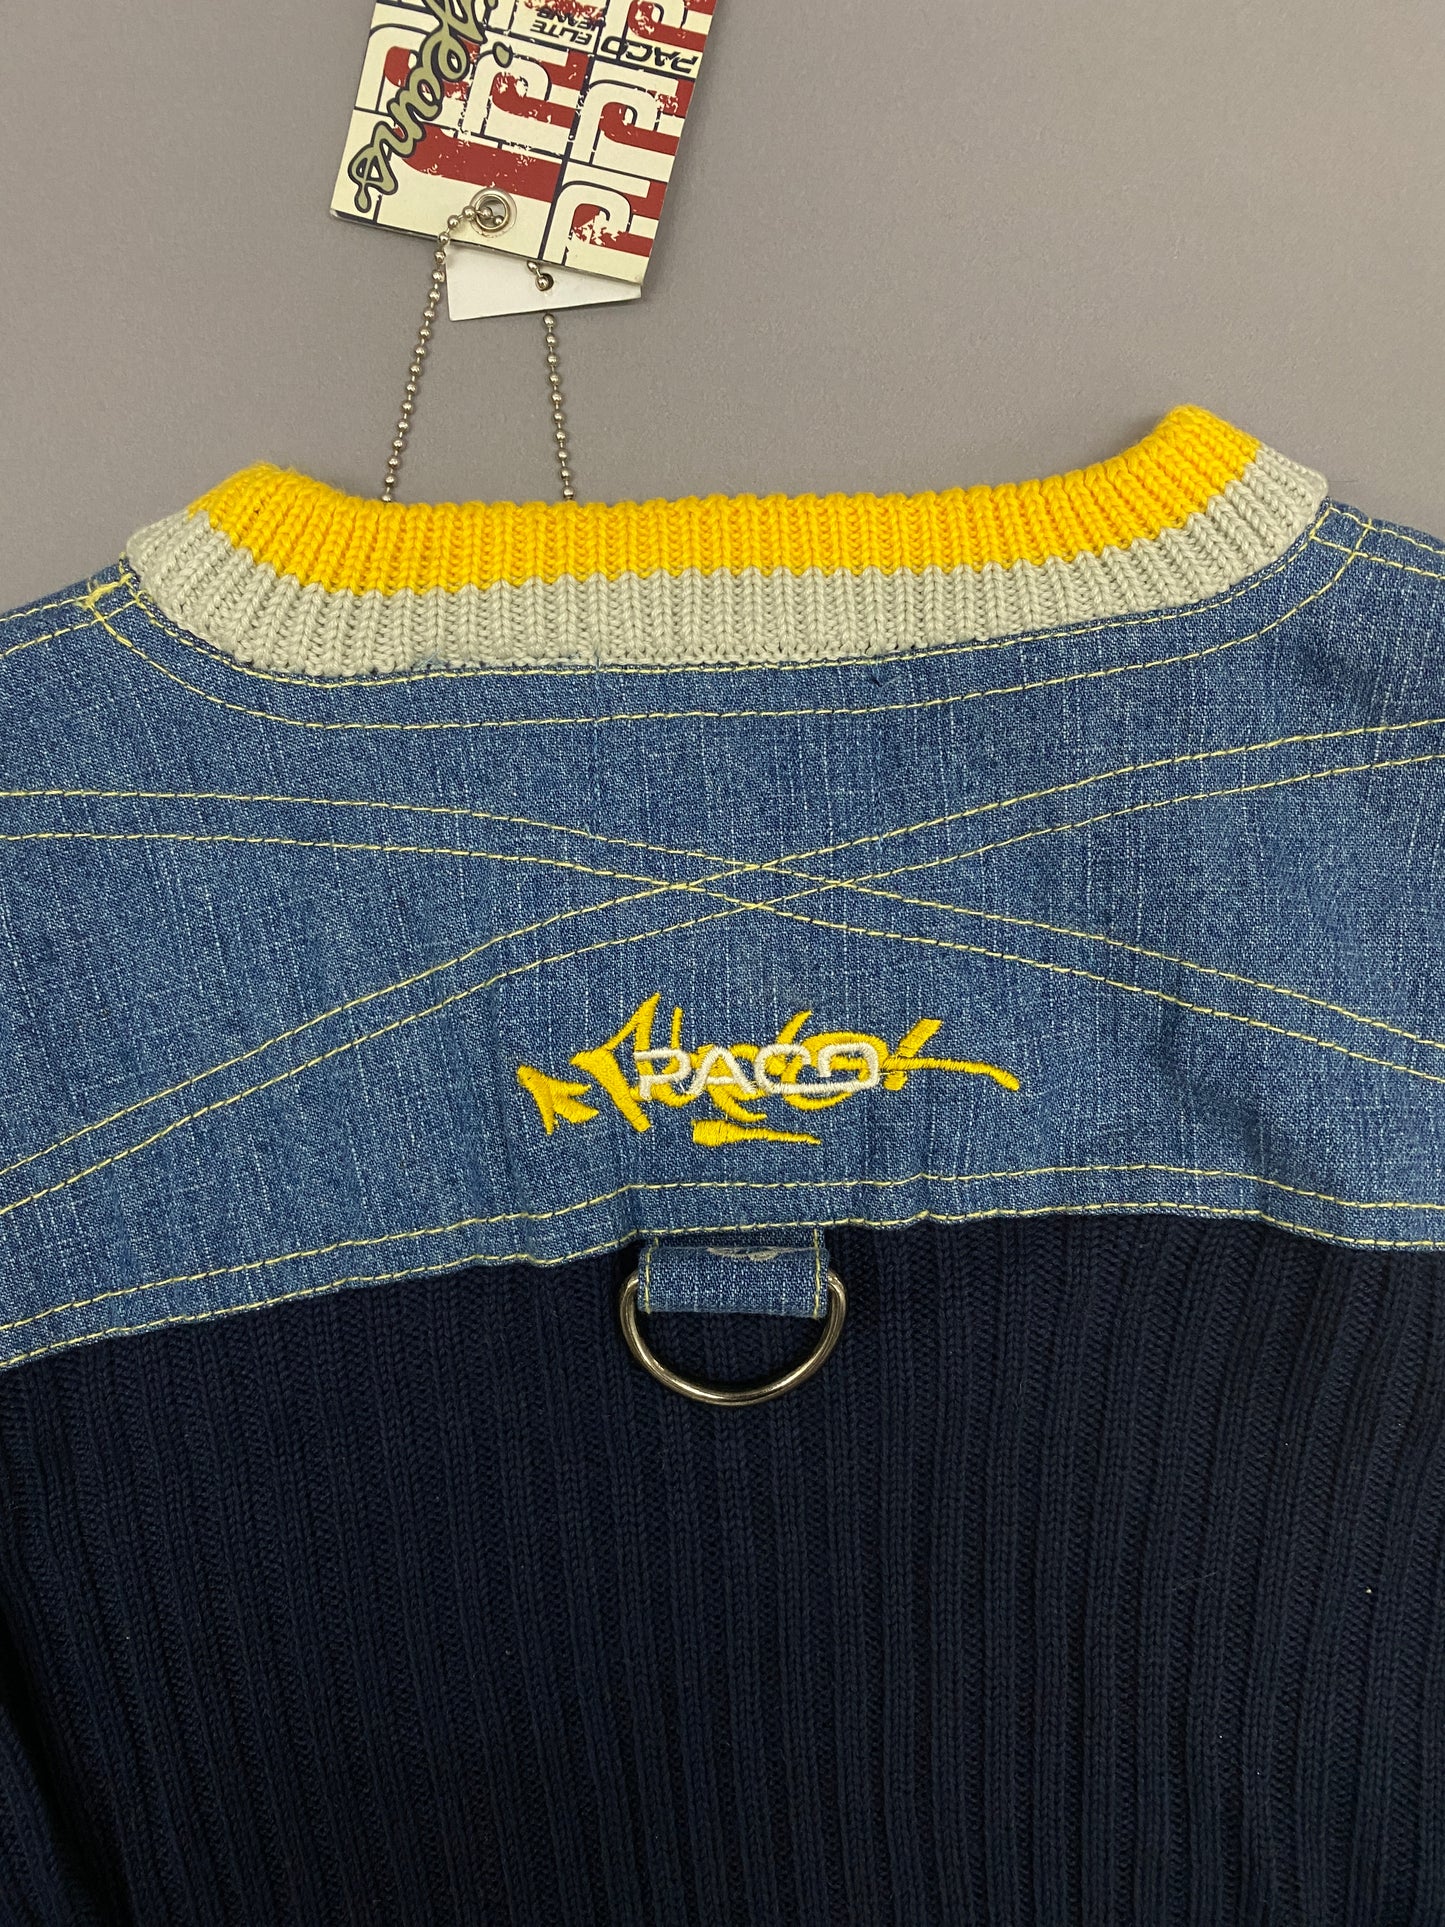 Paco Jeans Vintage Sweater